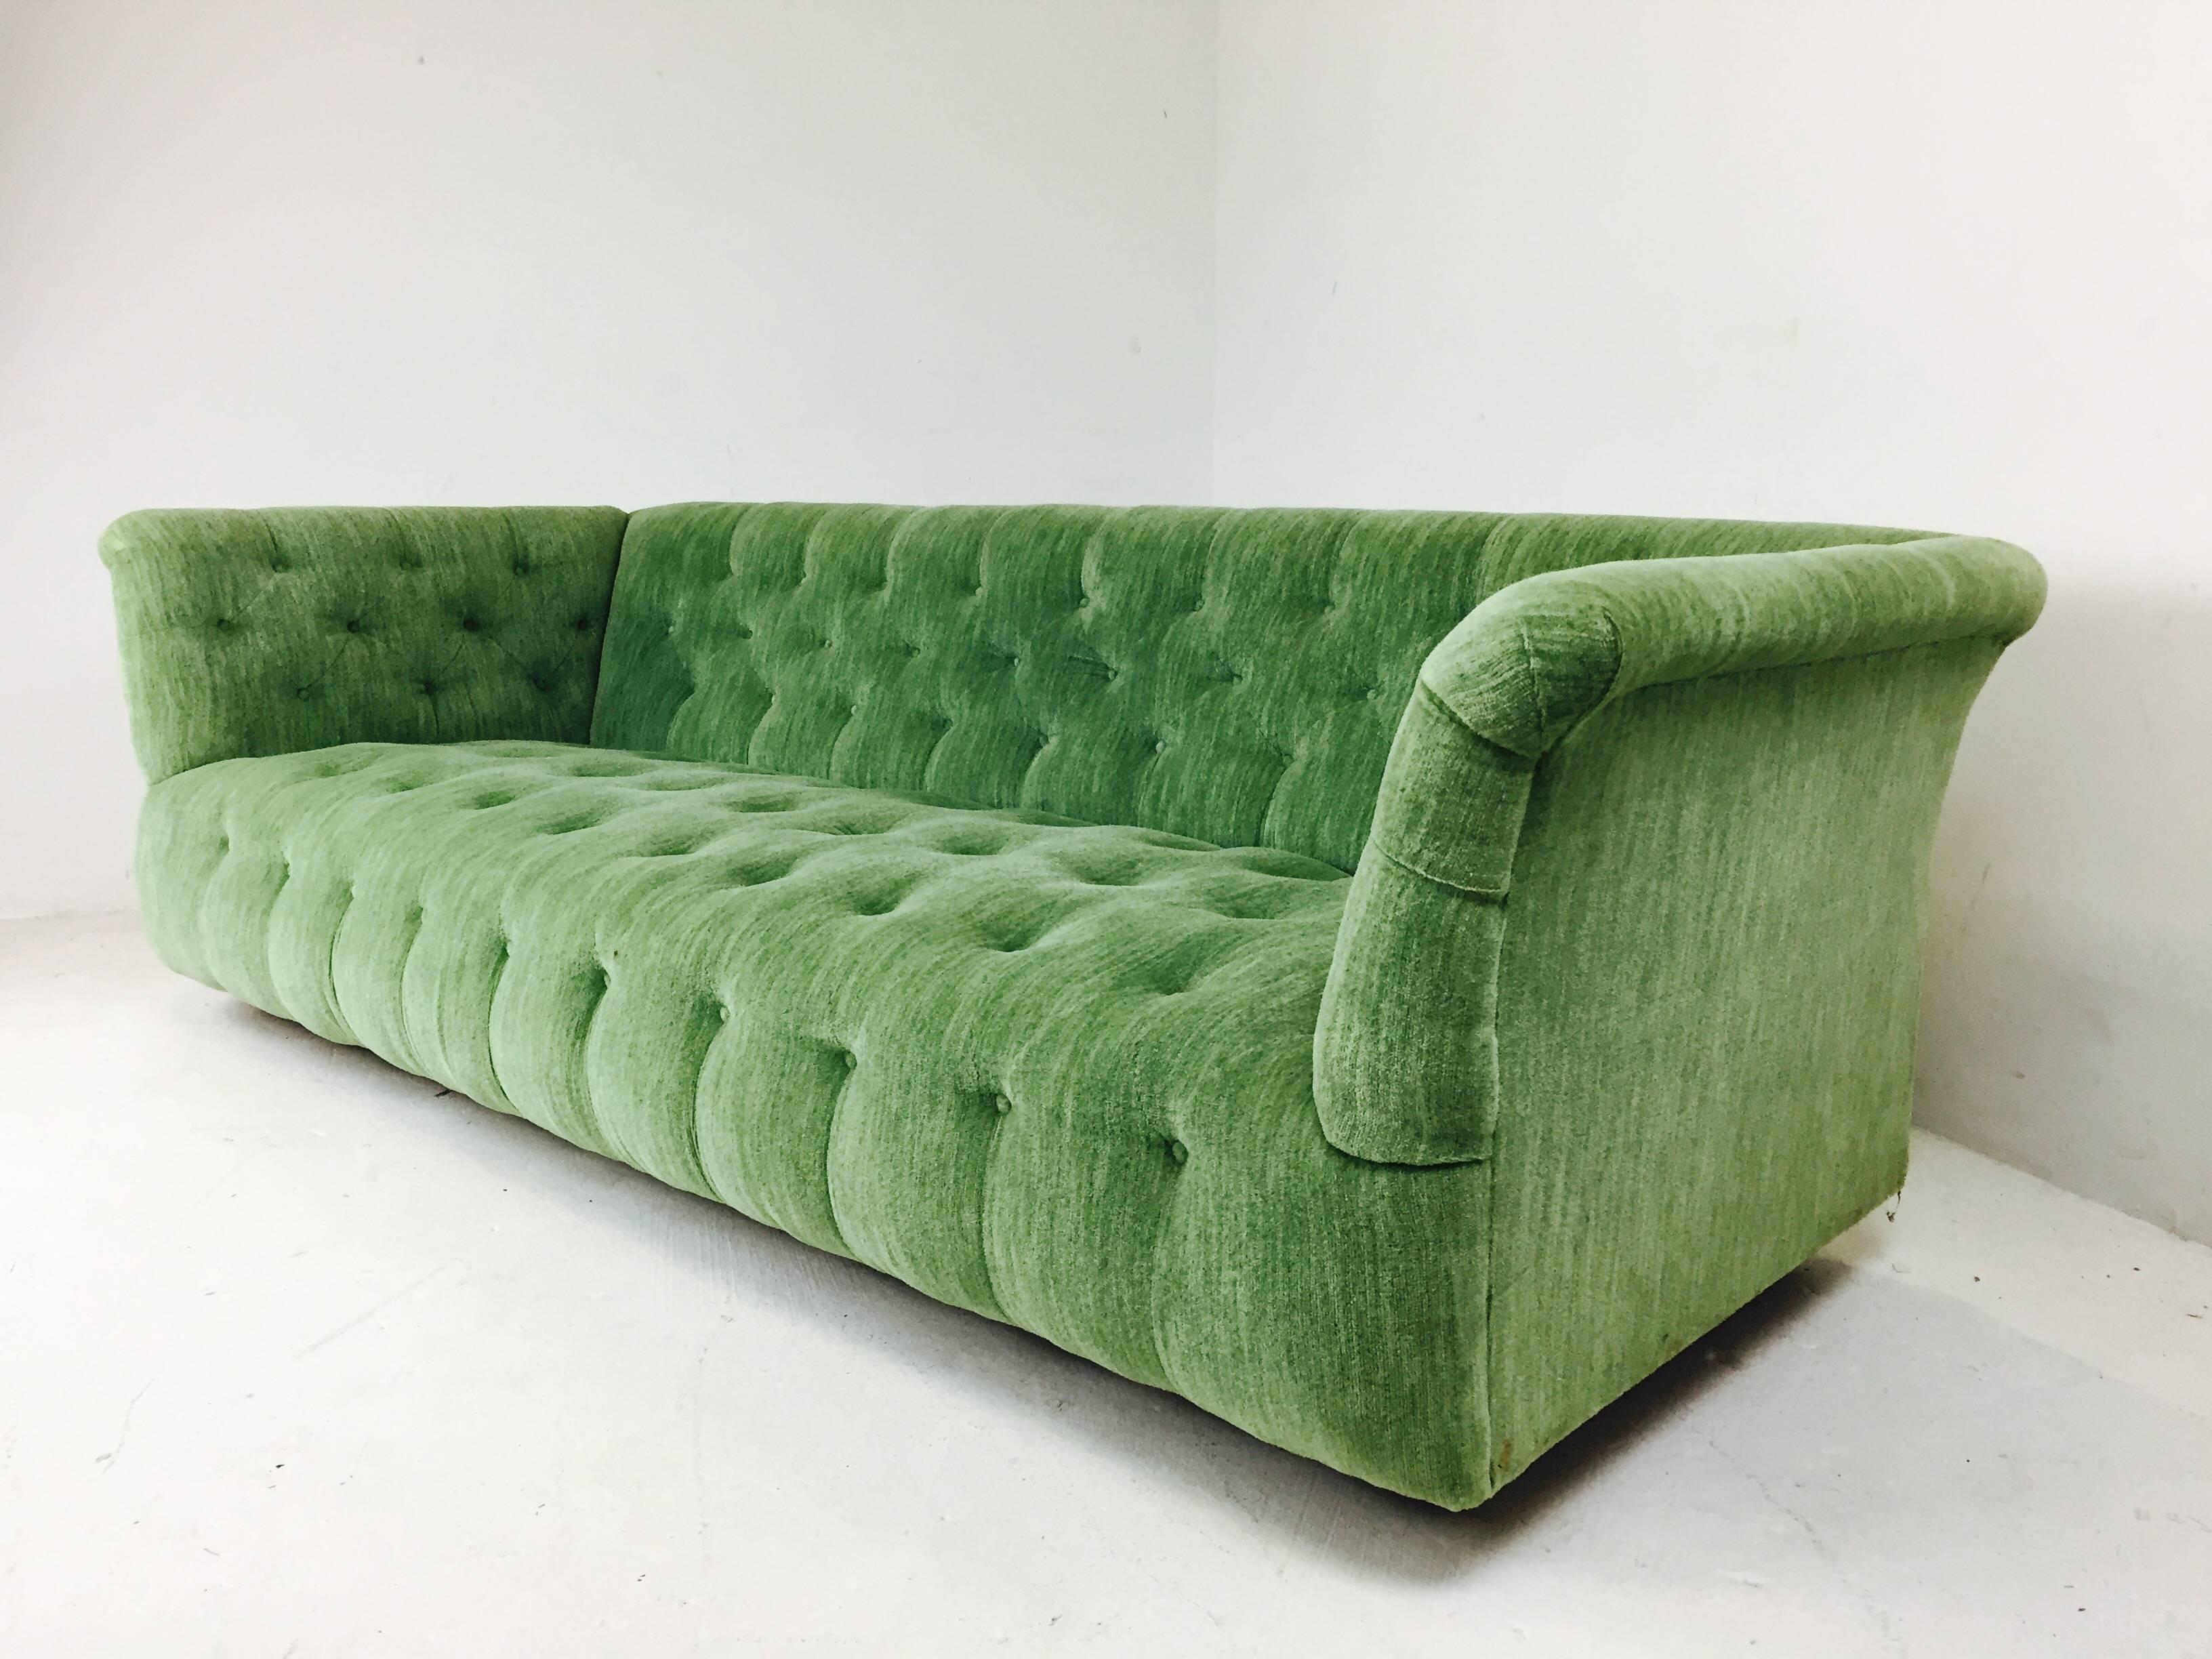 Milo Baughman Chesterfield style tufted sofa with wood plinth base. In good vintage condition, circa 1980s

Dimension: 84